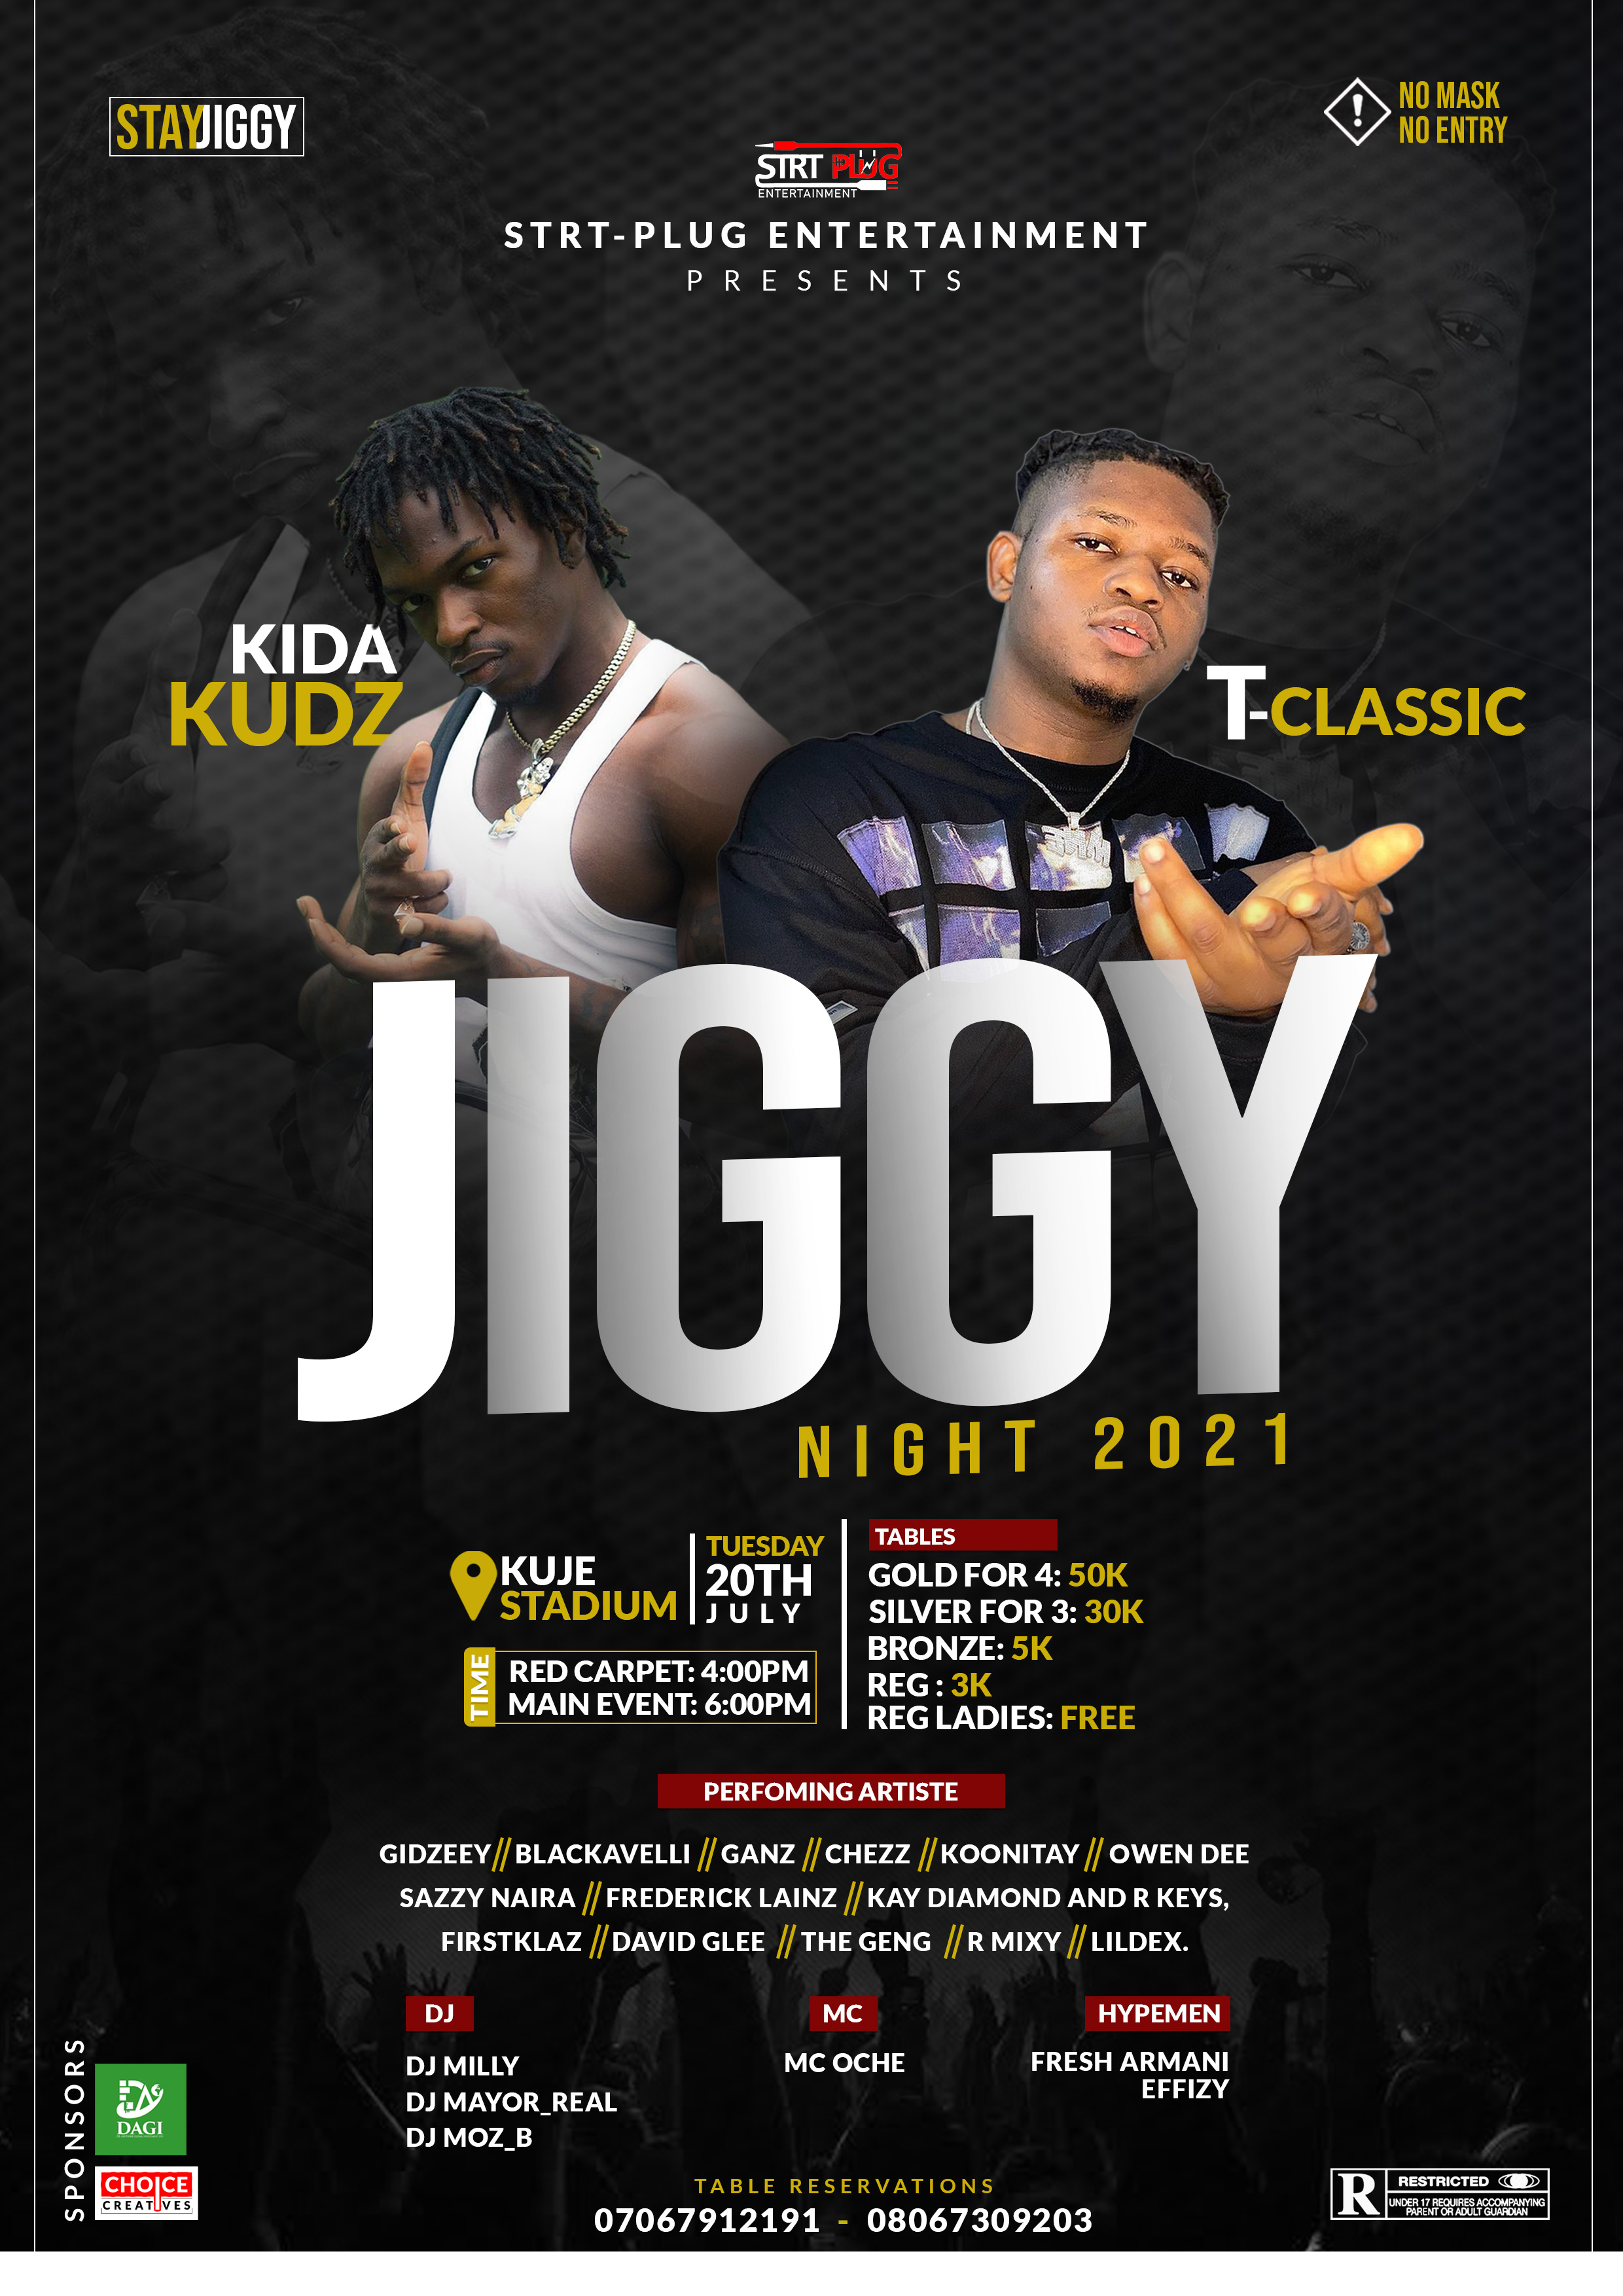 Get tickets to JIGGY NIGHT 2021 on Tickethub.ng - Tickethub.ng